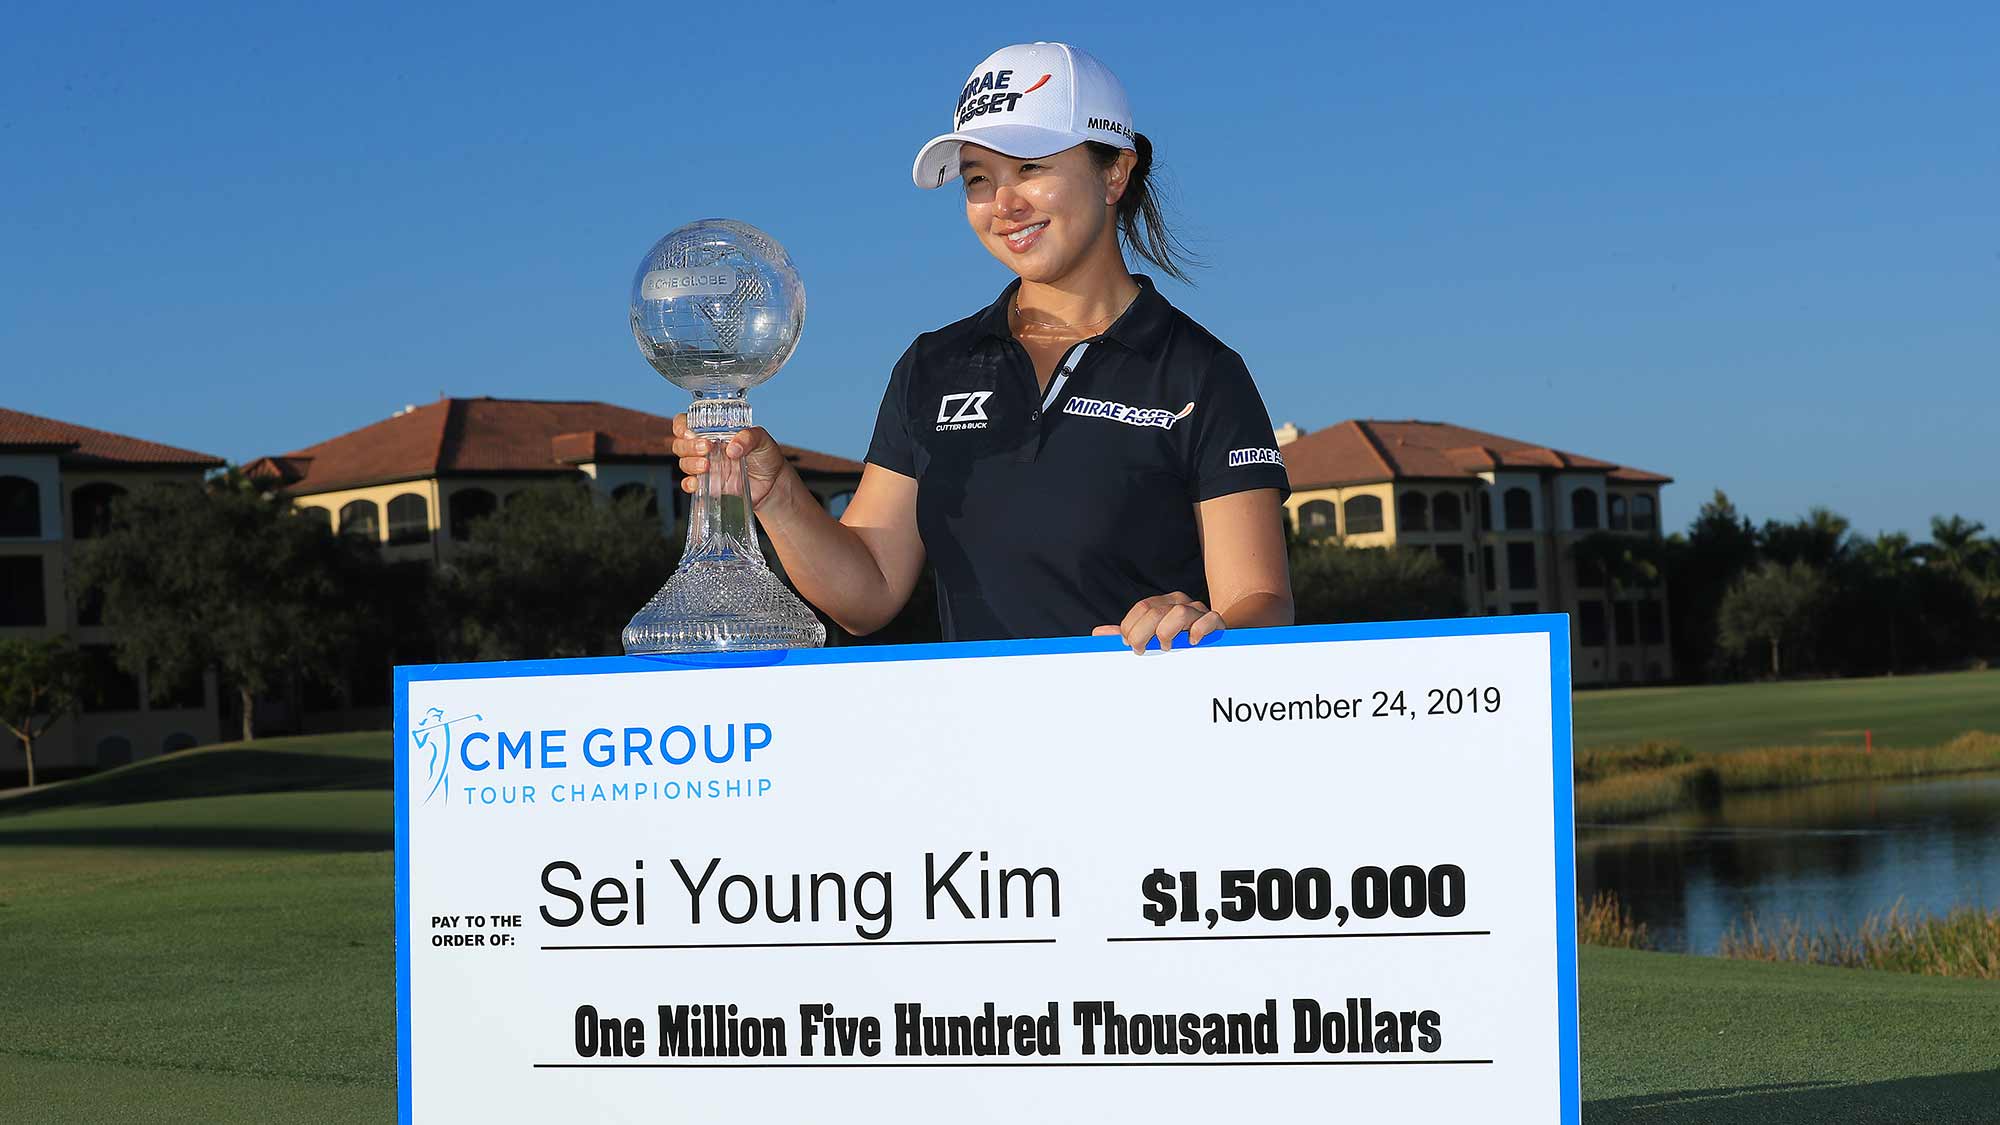 Sei Young Kim of South Korea poses with the CME Globe trophy and winner's check after winning the CME Group Tour Championship at Tiburon Golf Club on November 24, 2019 in Naples, Florida.